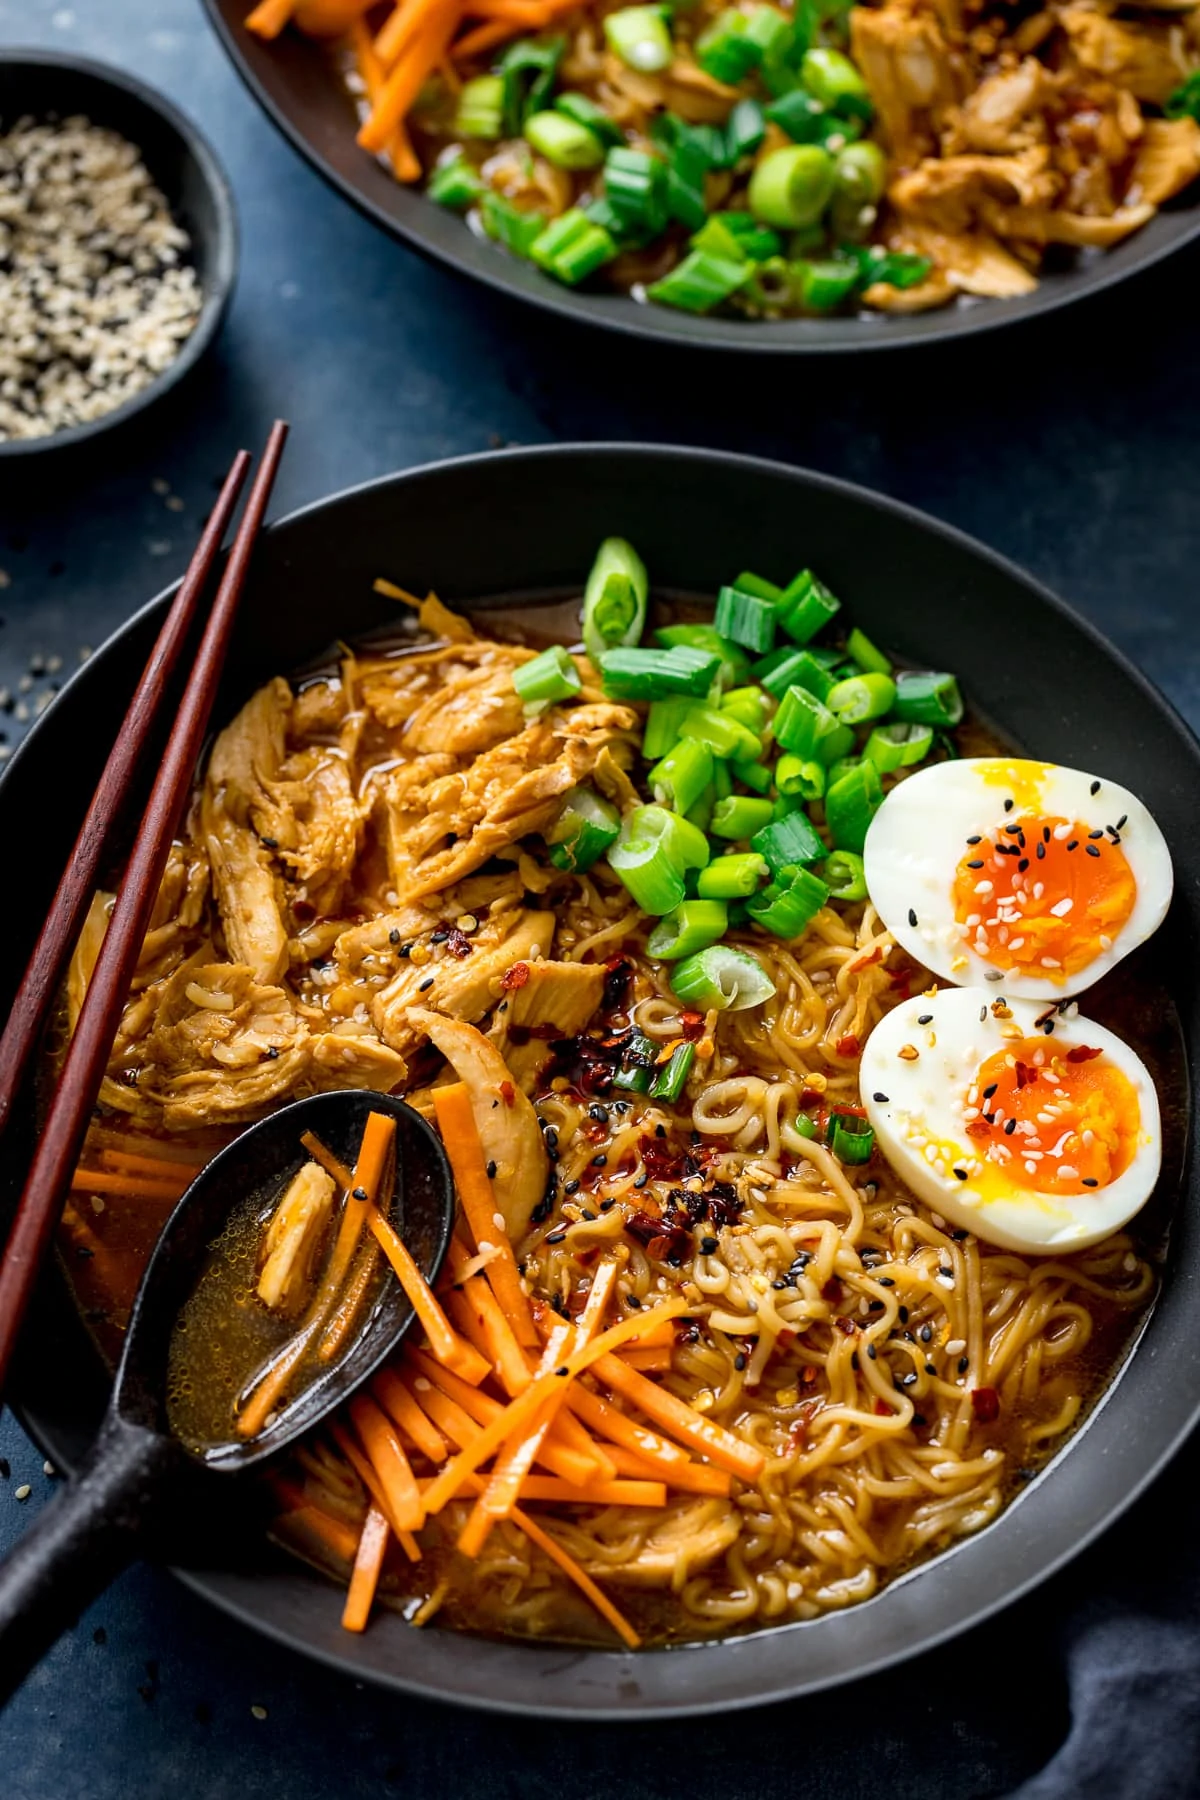 Chicken Ramen in a black bowl topped with egg, carrots and spring onions. Spoonful being taken.